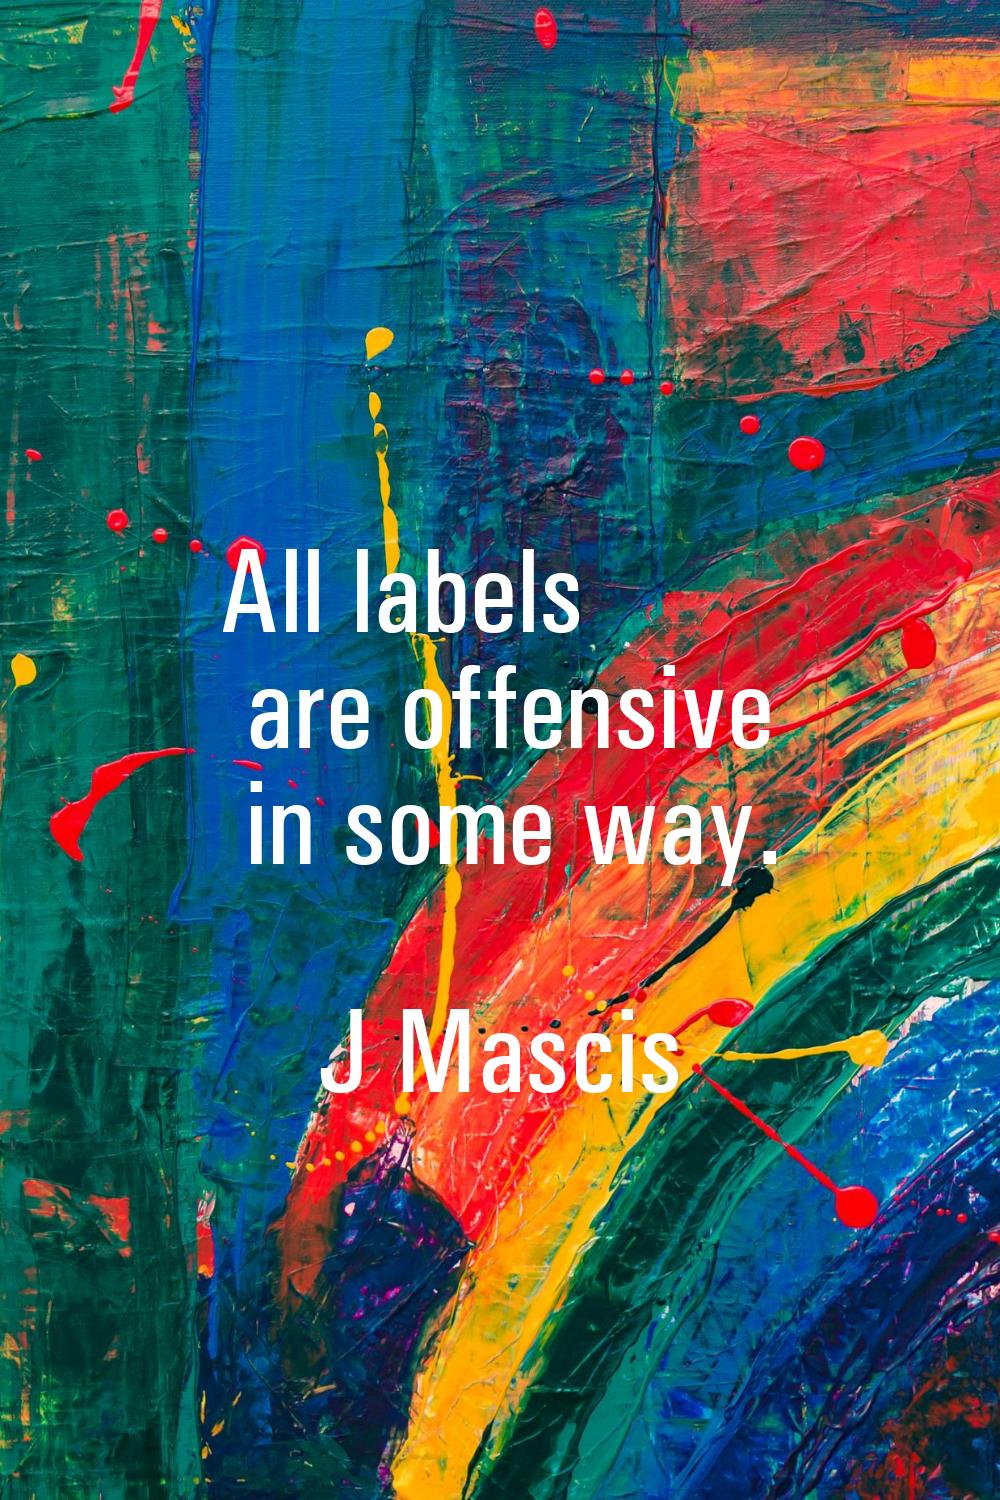 All labels are offensive in some way.